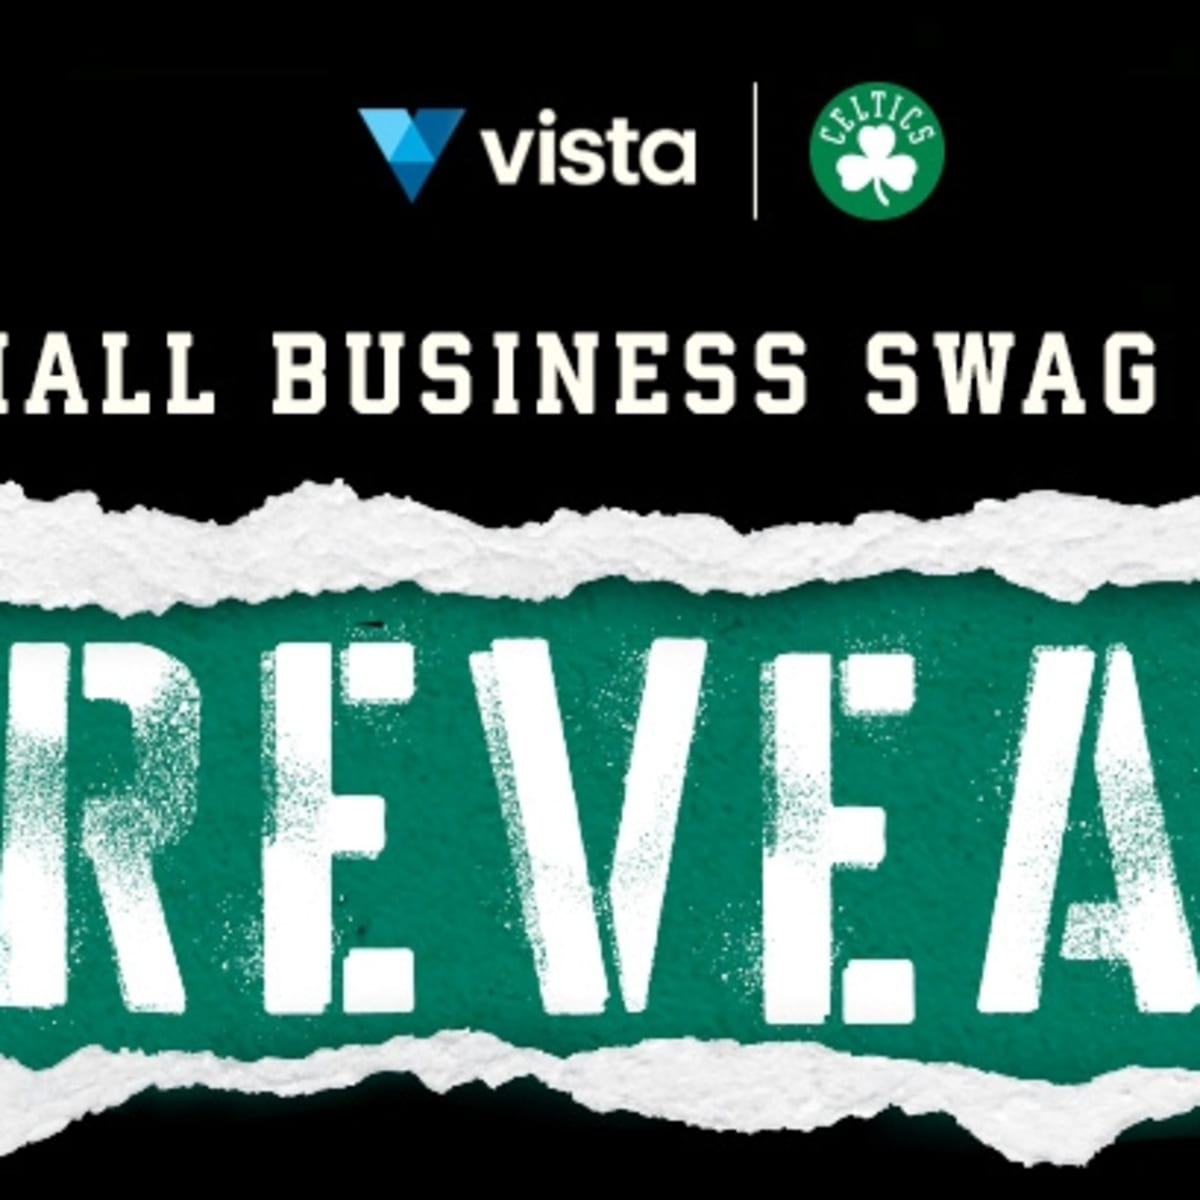 Proud partner of the Boston Celtics and small businesses